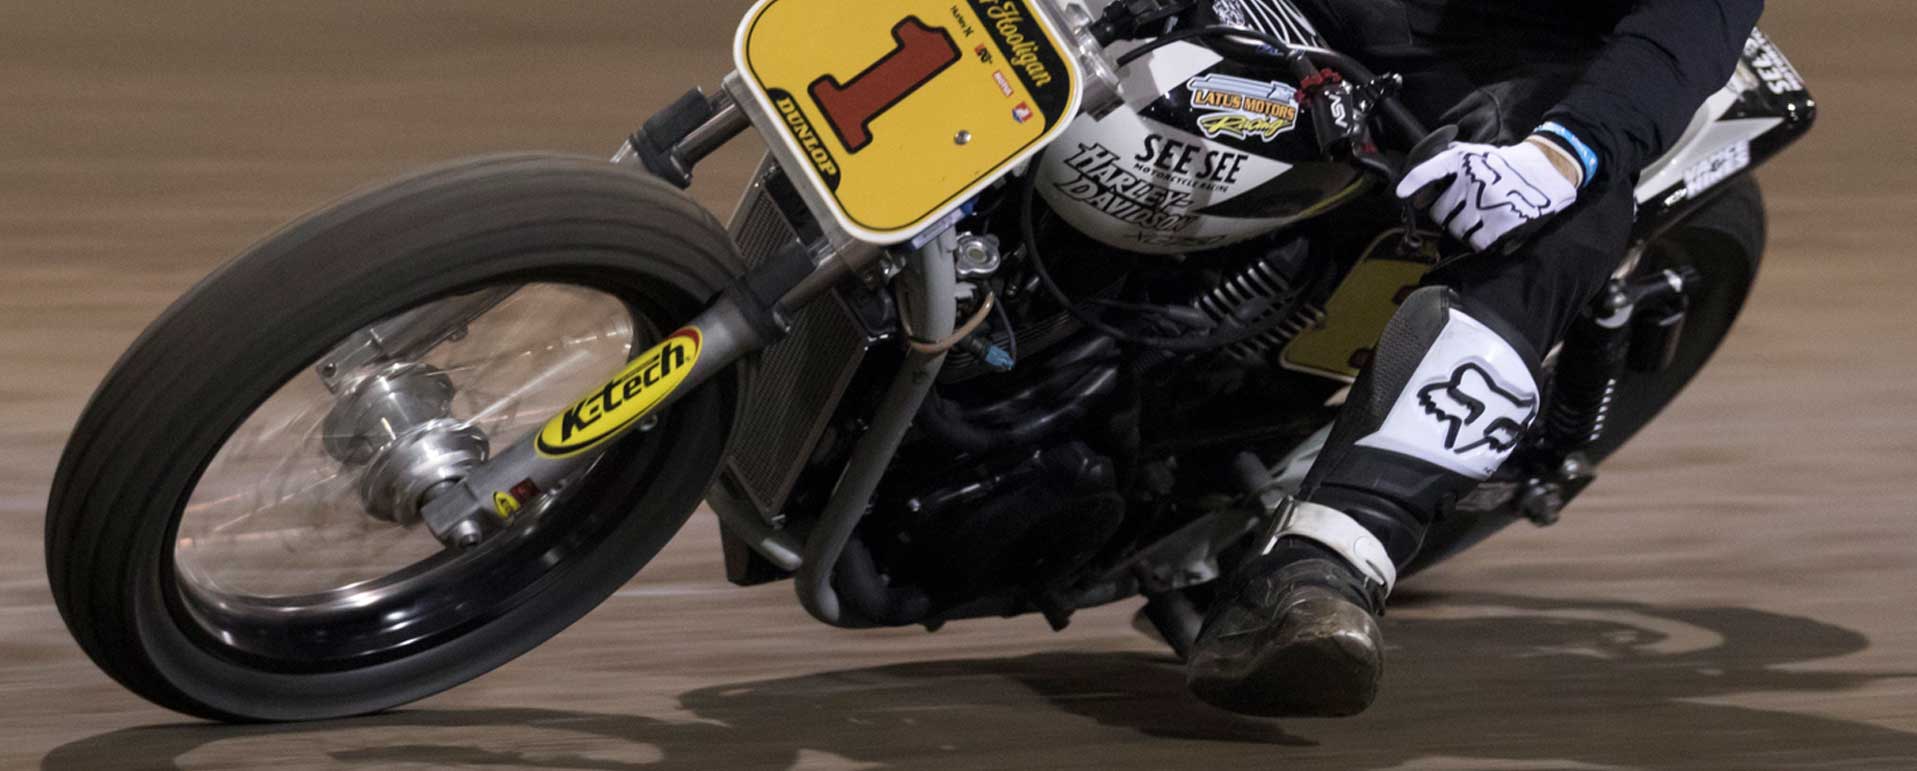 Salem, Oregon The 1 Pro motorcycle flat track racing round 1 of Super Hooligan National Championship and put on by The 1 Pro Moto Show in Portland rider is Andy DiBrino, 2017 Super Hooligan National Champion